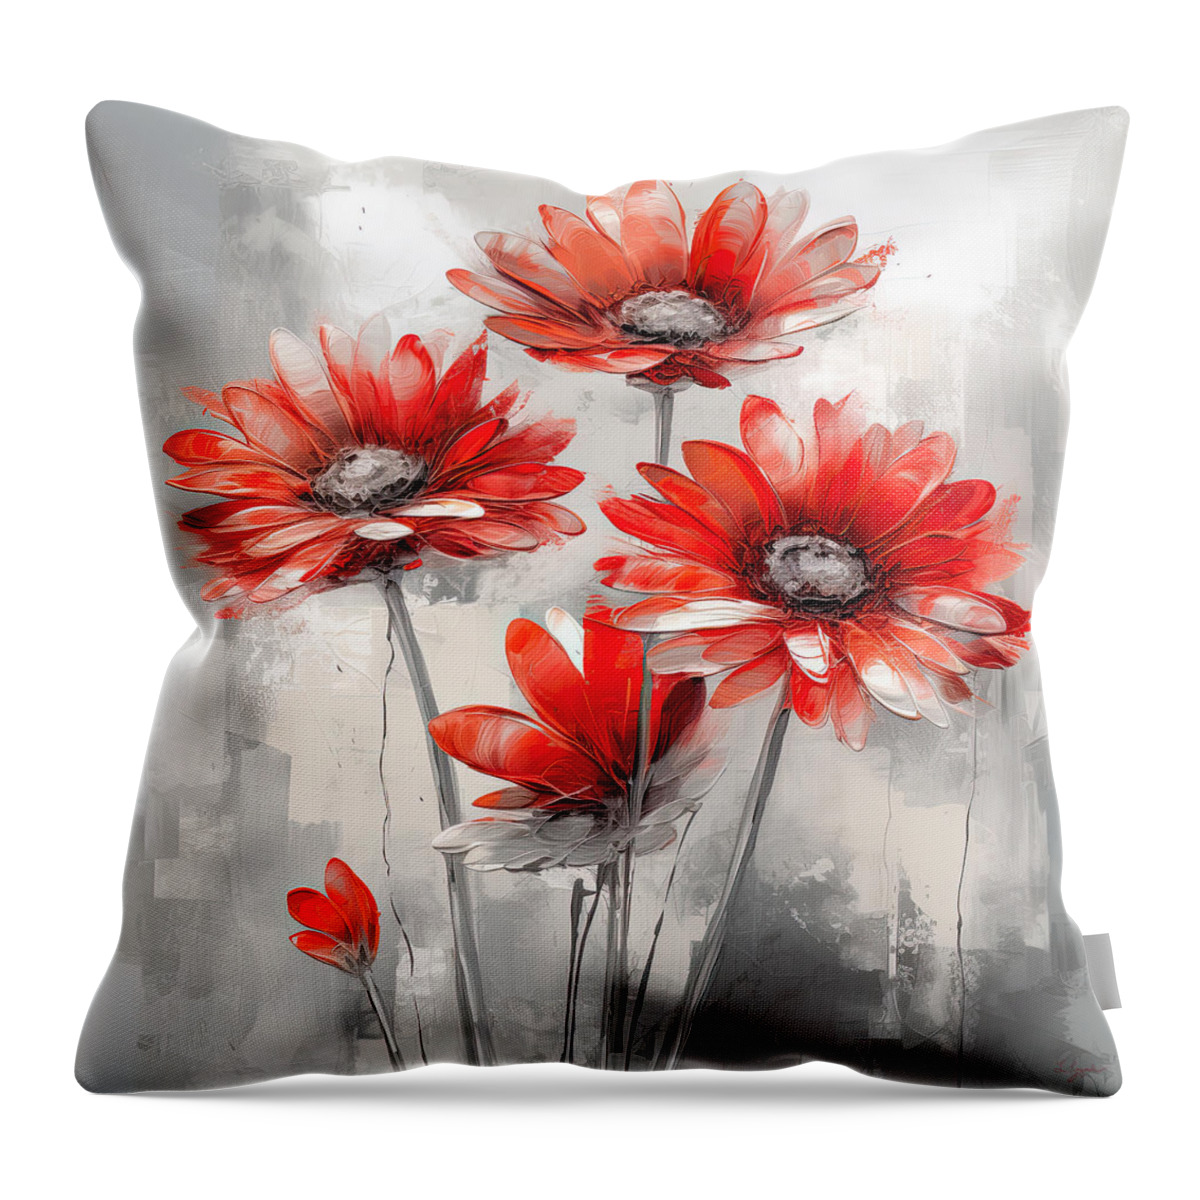 Red And Gray Art Throw Pillow featuring the digital art Red Flower Minimalist Art on Gray by Lourry Legarde